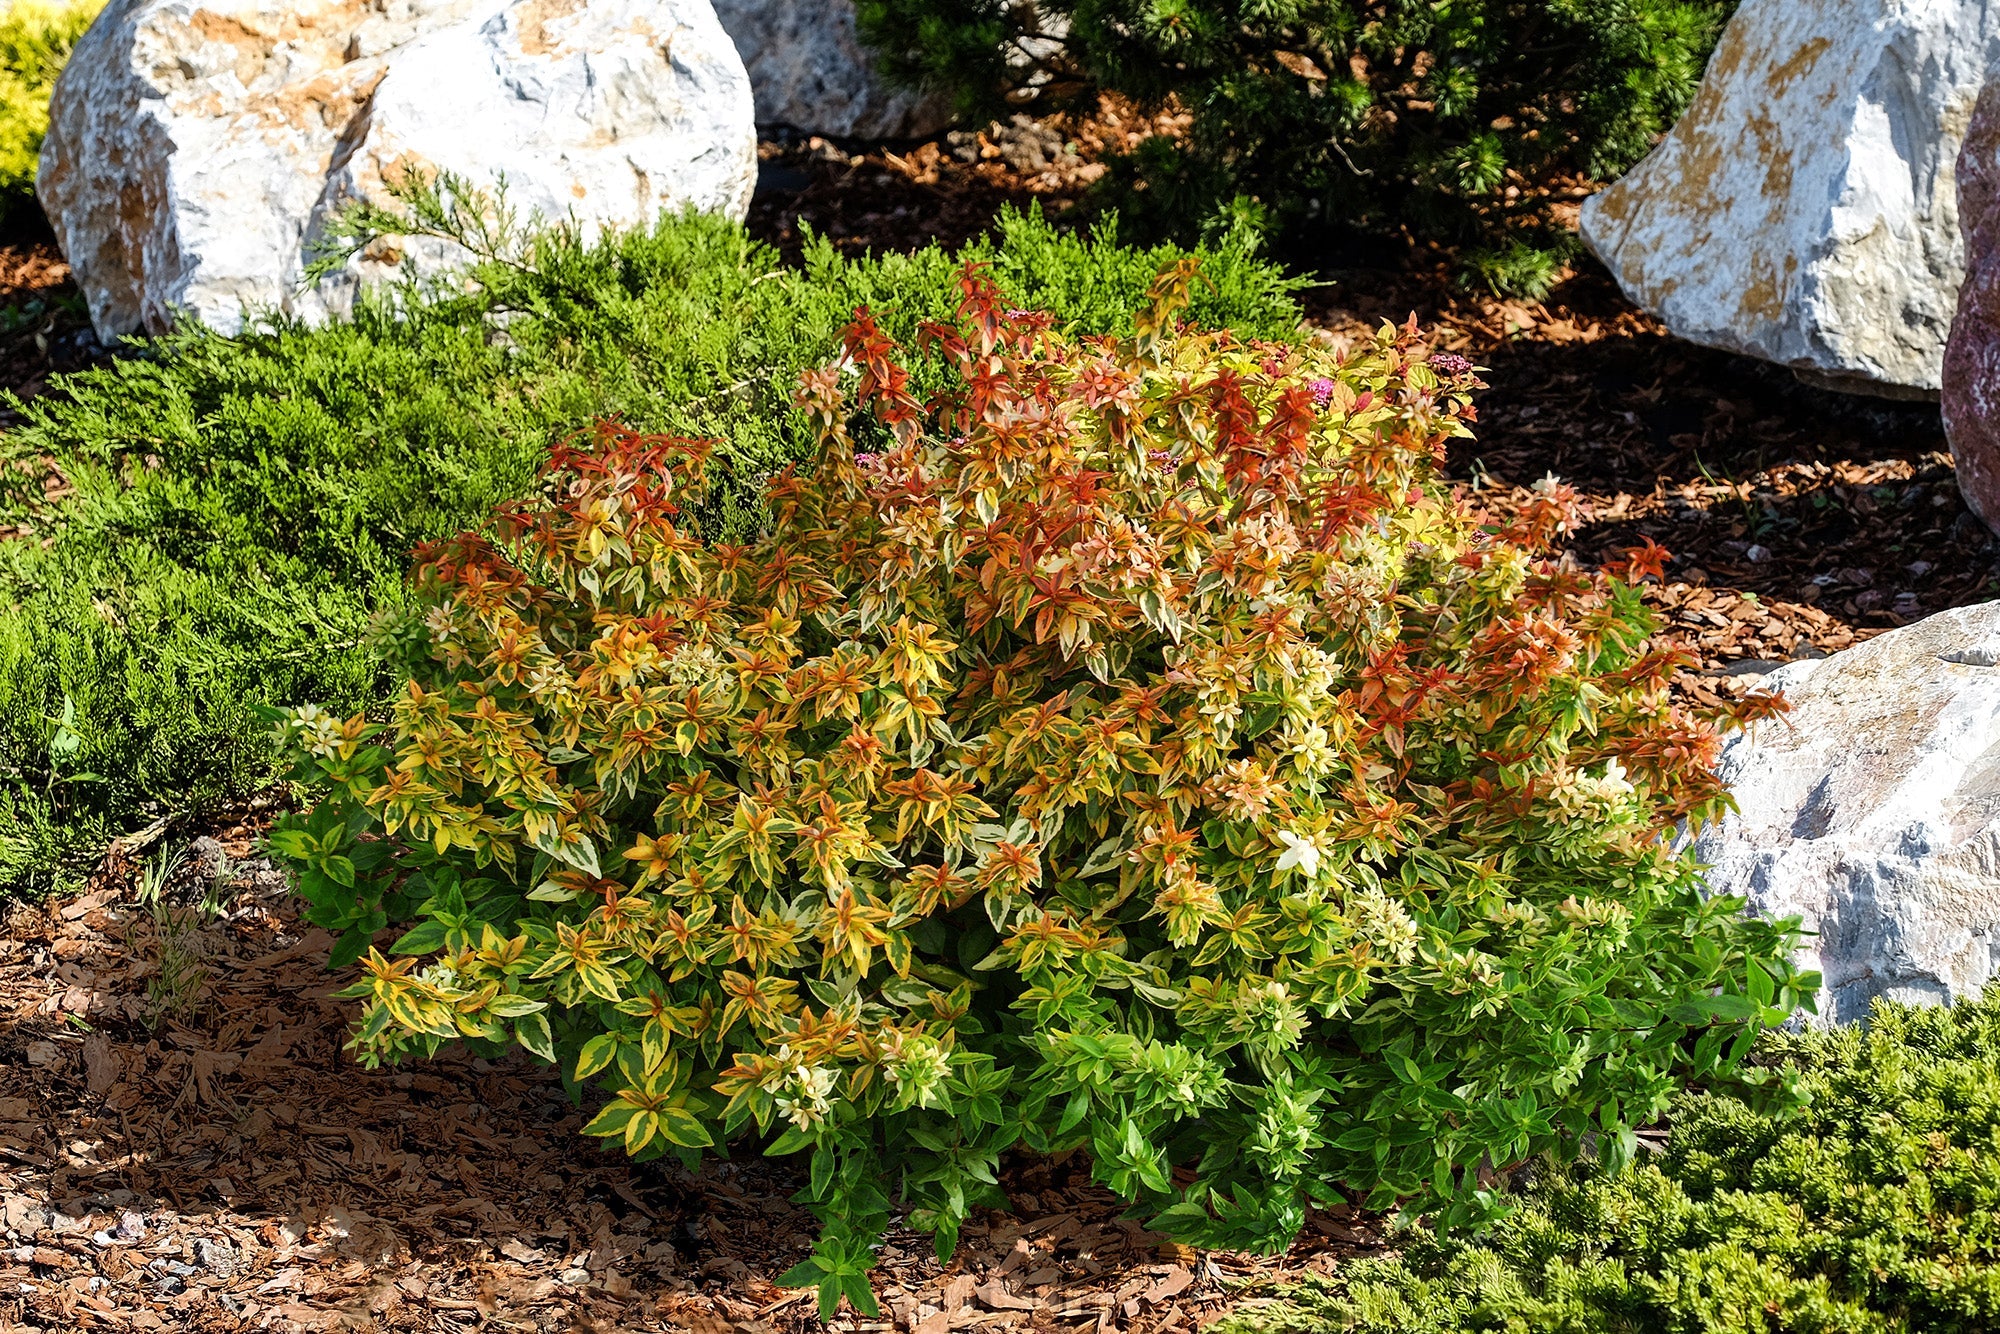 Even without blossoms, this Kaleidoscope  abelia's colorful foliage stands out surrounded by the textured garden design. 